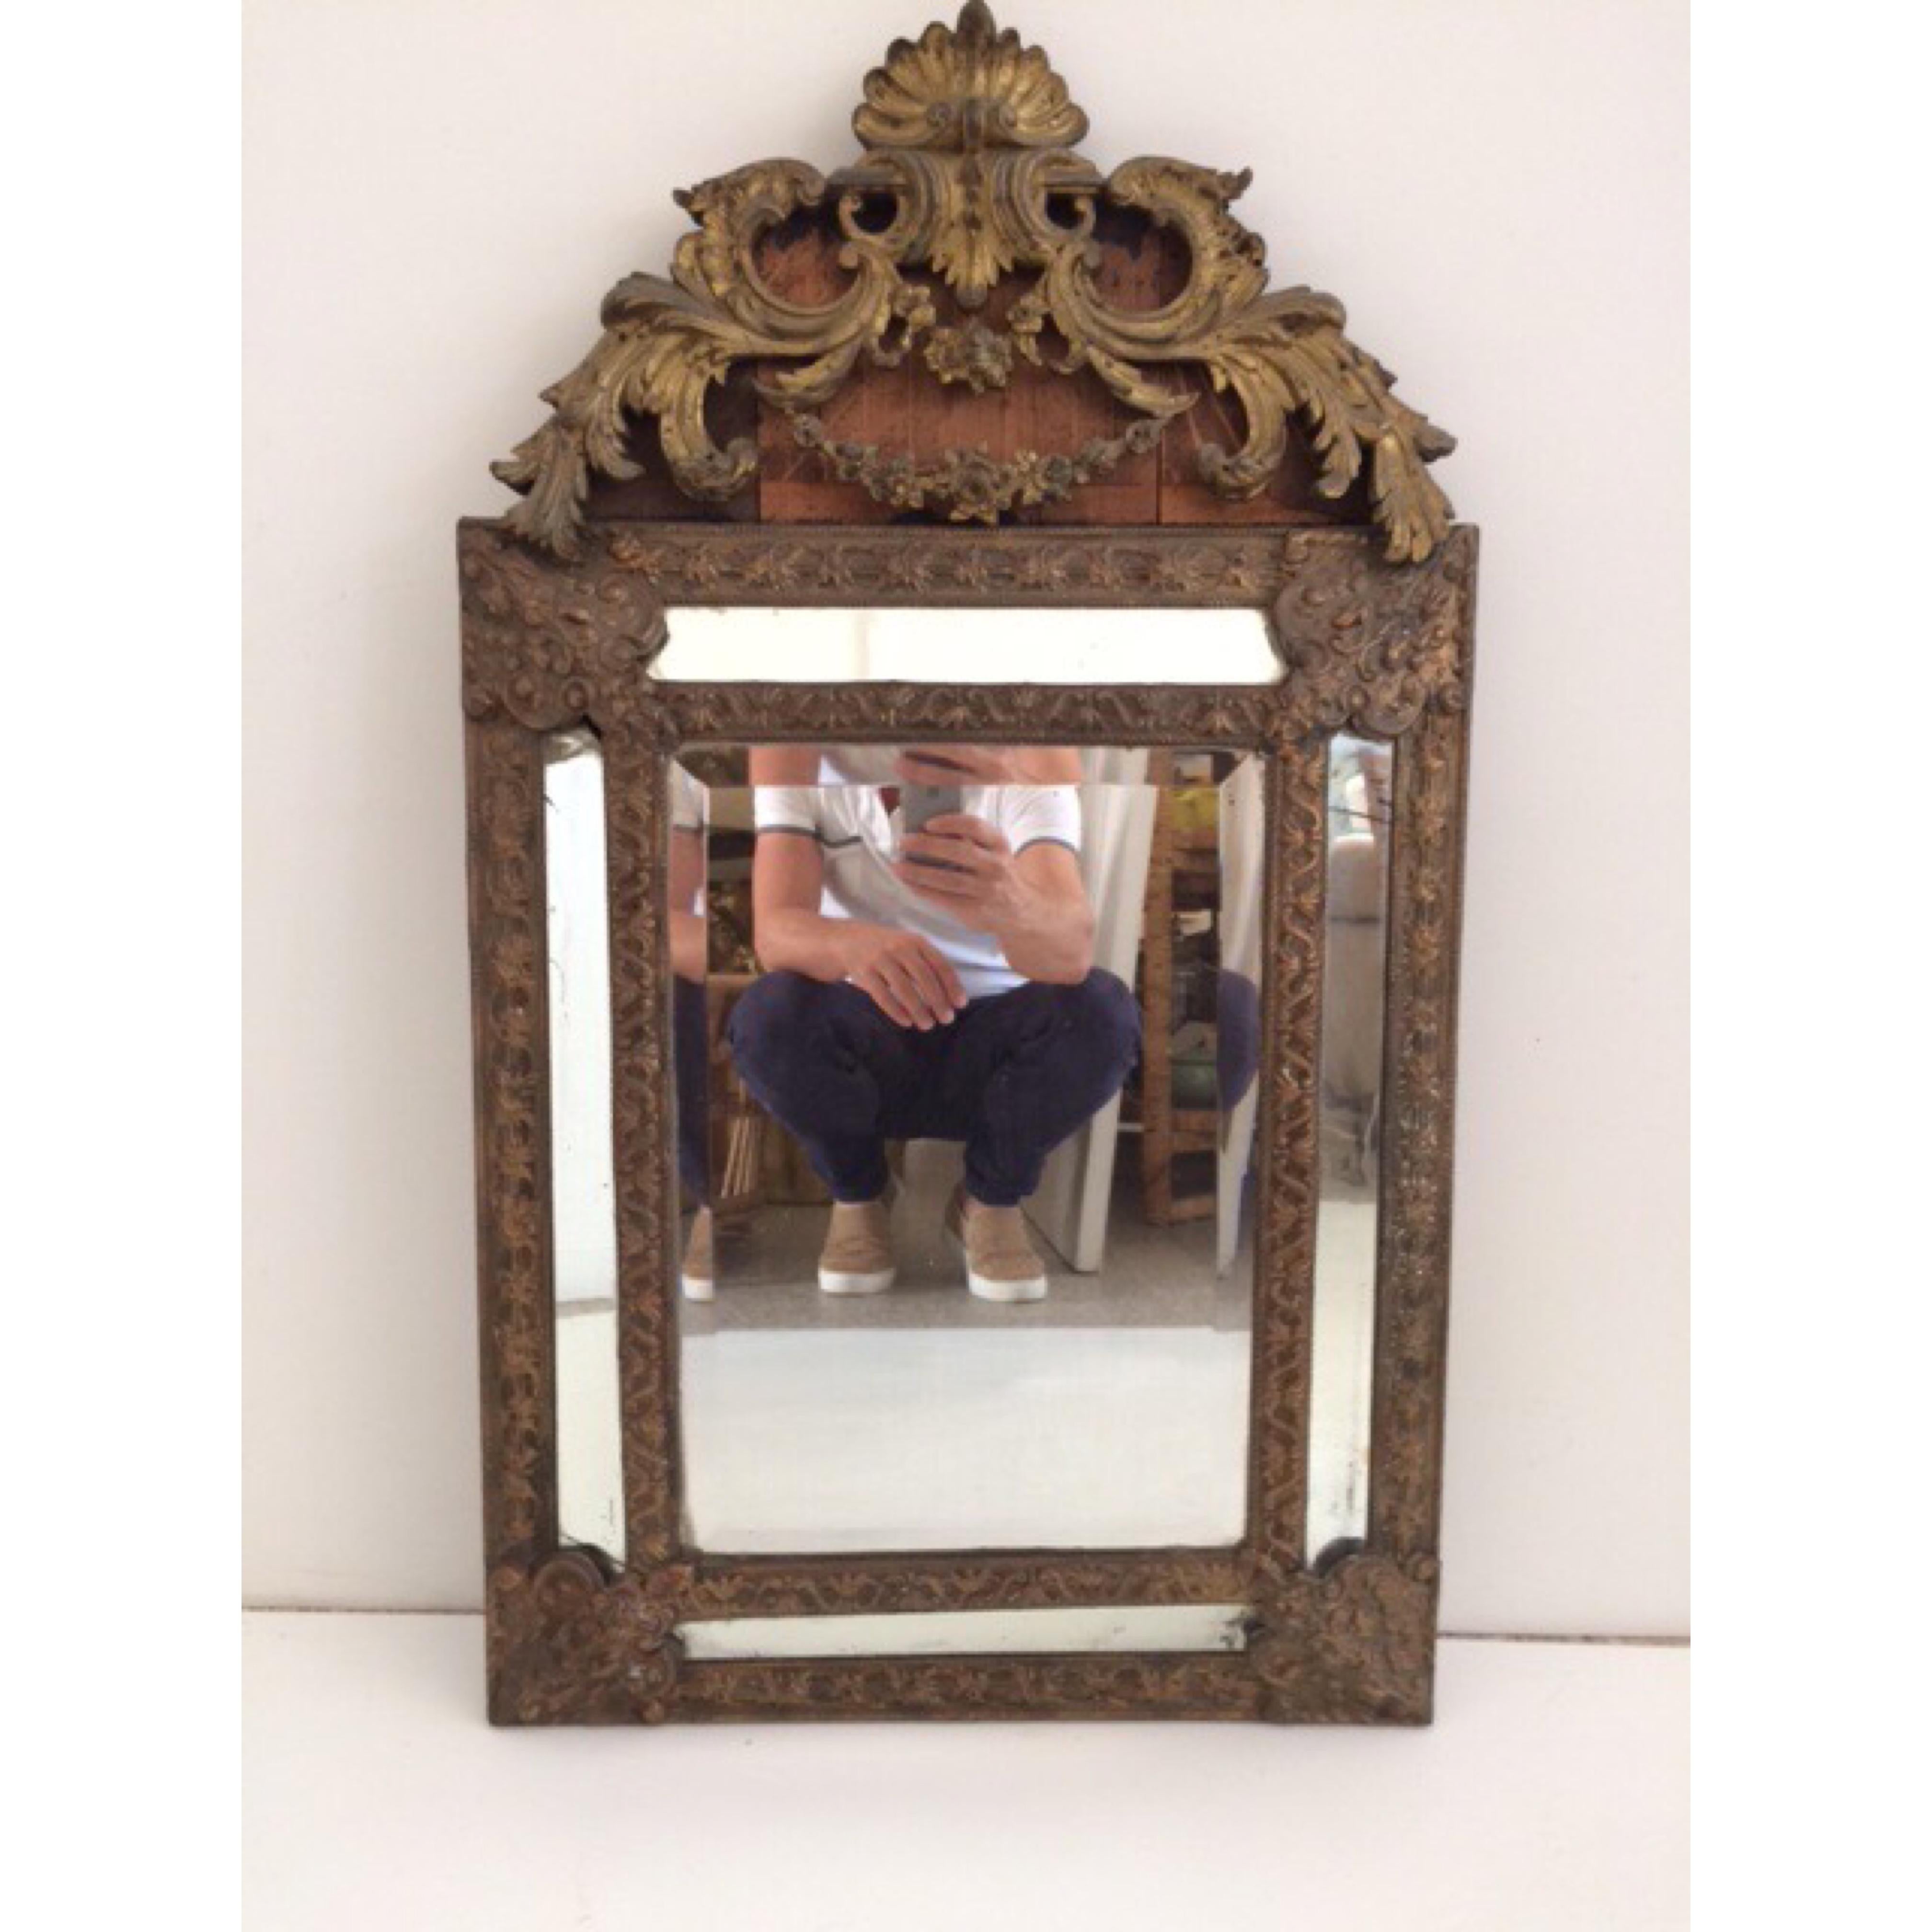 Other Late 18th Century Continental European Mirror